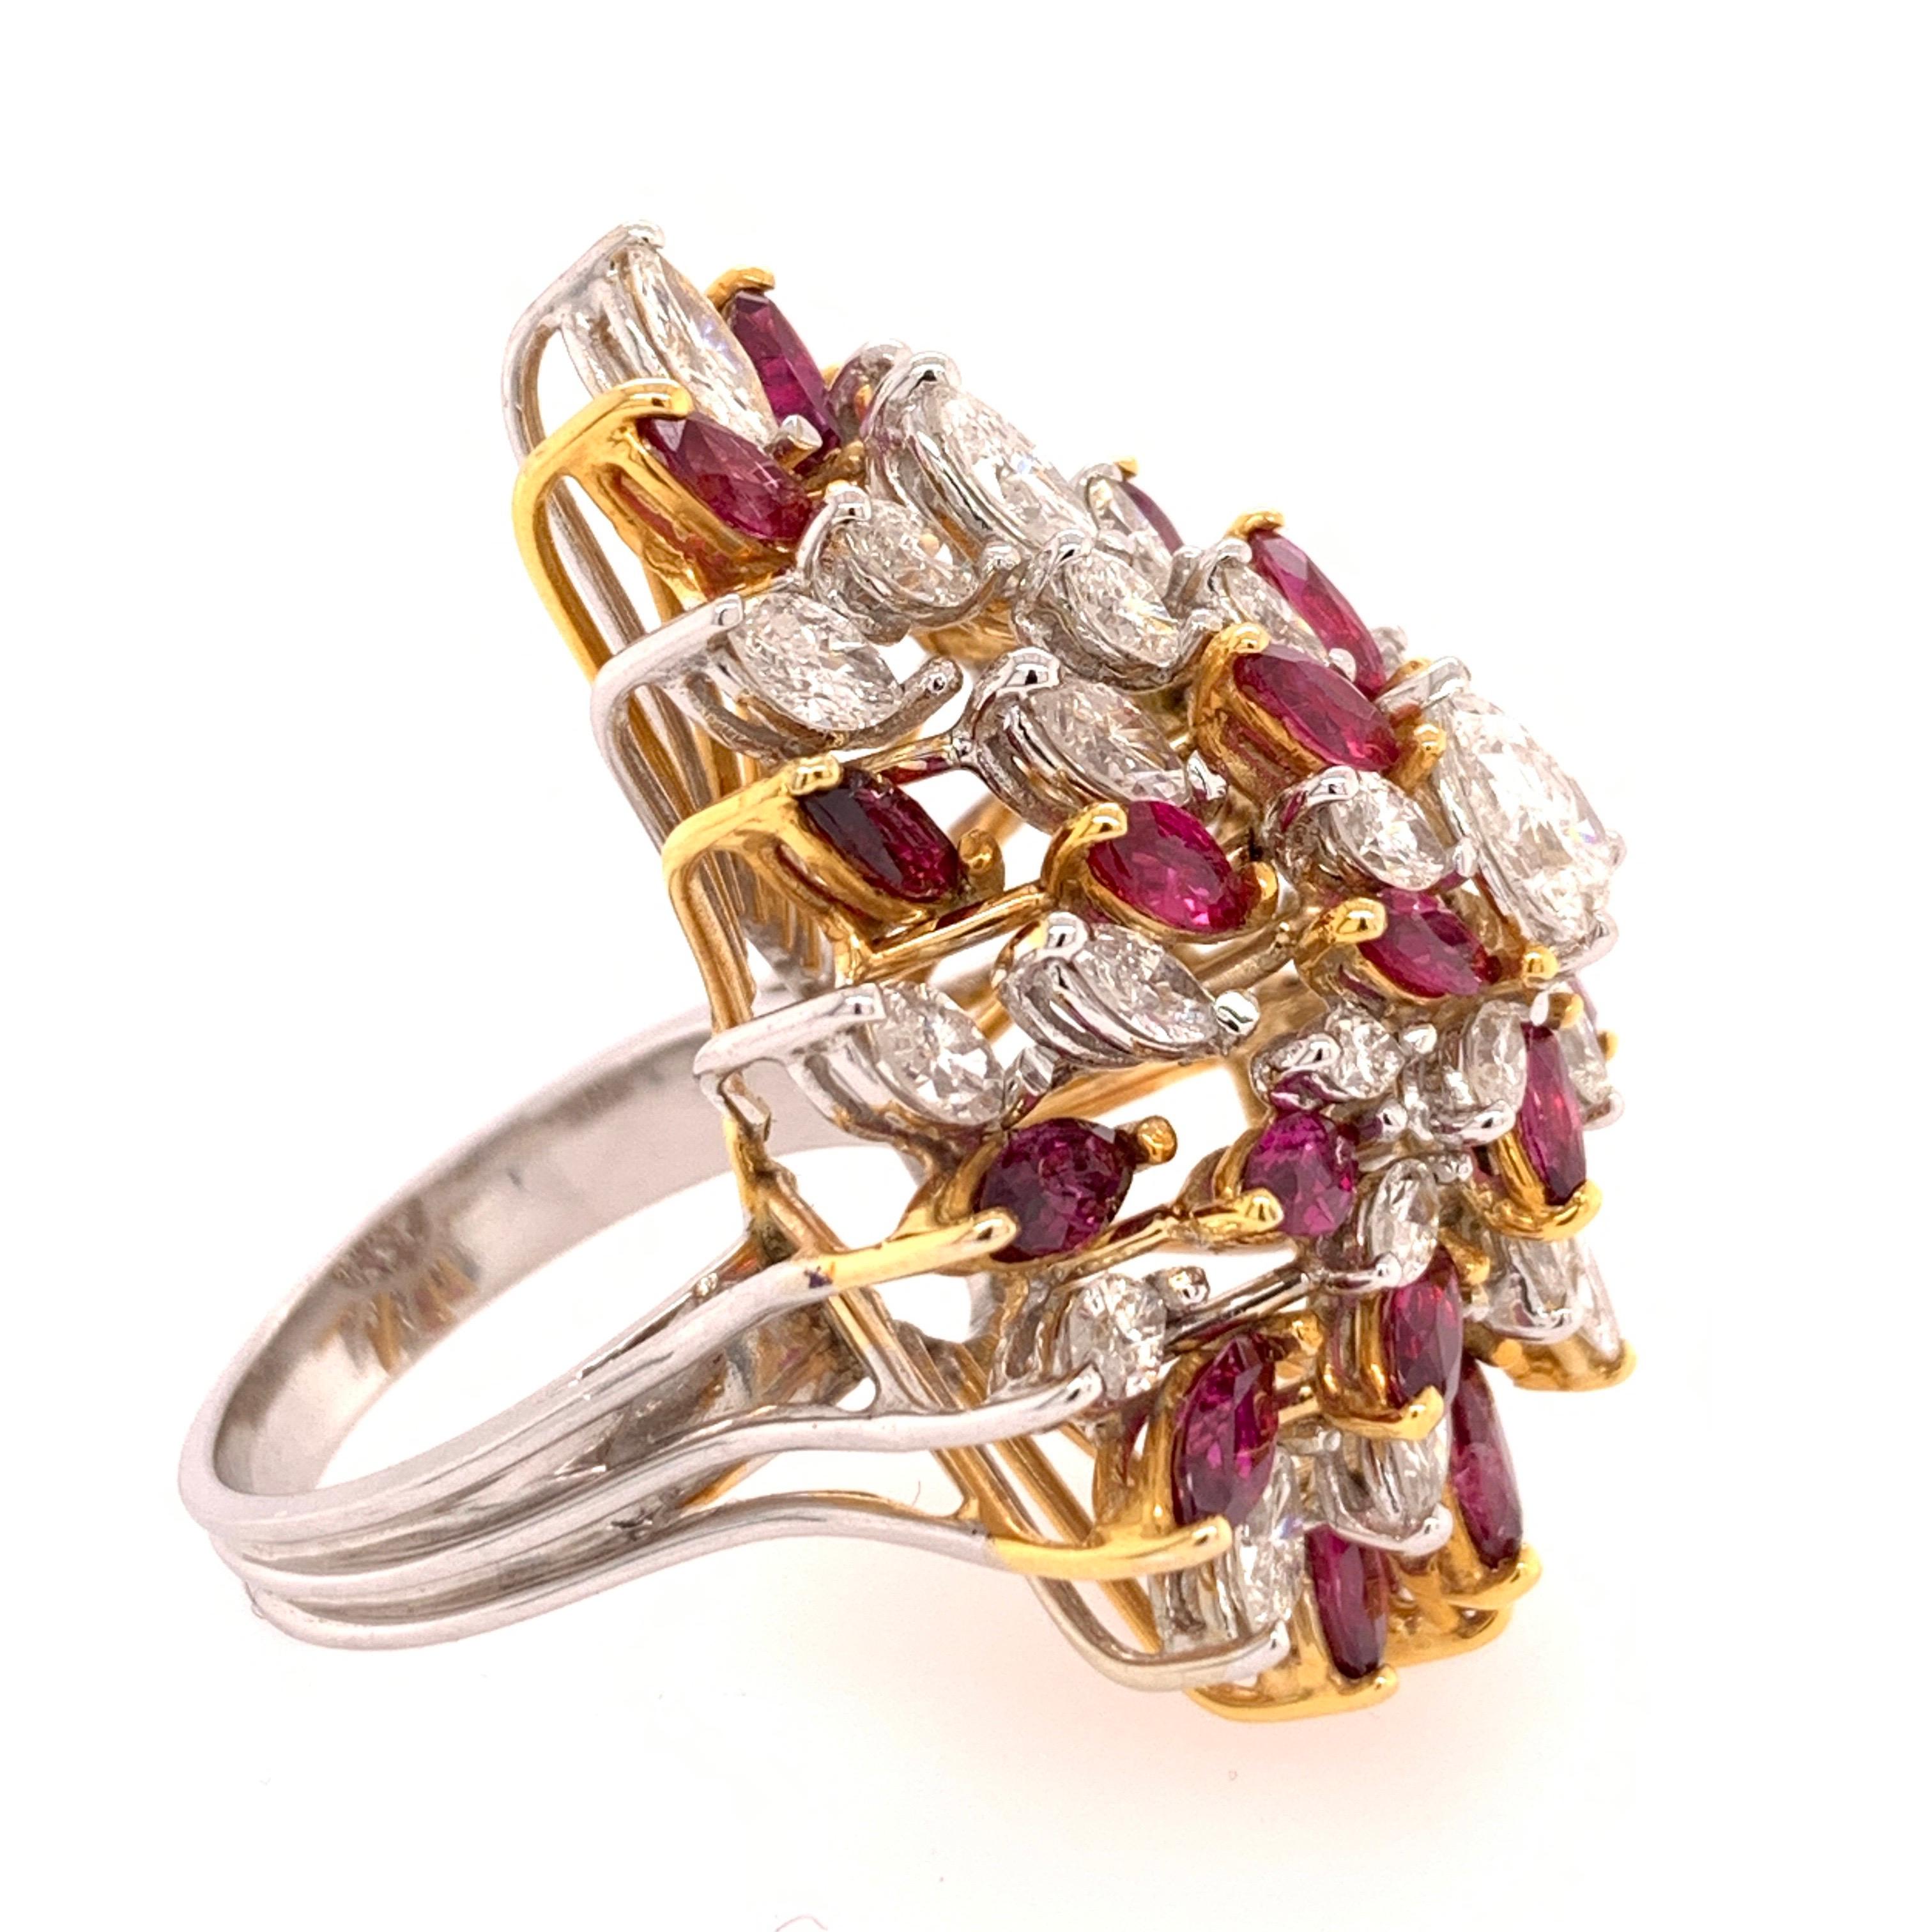 Magnificent Gold cocktail ring with a total NATURAL diamond weight of approximately 5.25cts (32 stones) and a total NATURAL ruby weight of approximately 5.25cts (24 stones).

The diamonds consist of 31 marquise shaped appx G-I color and si-vvs